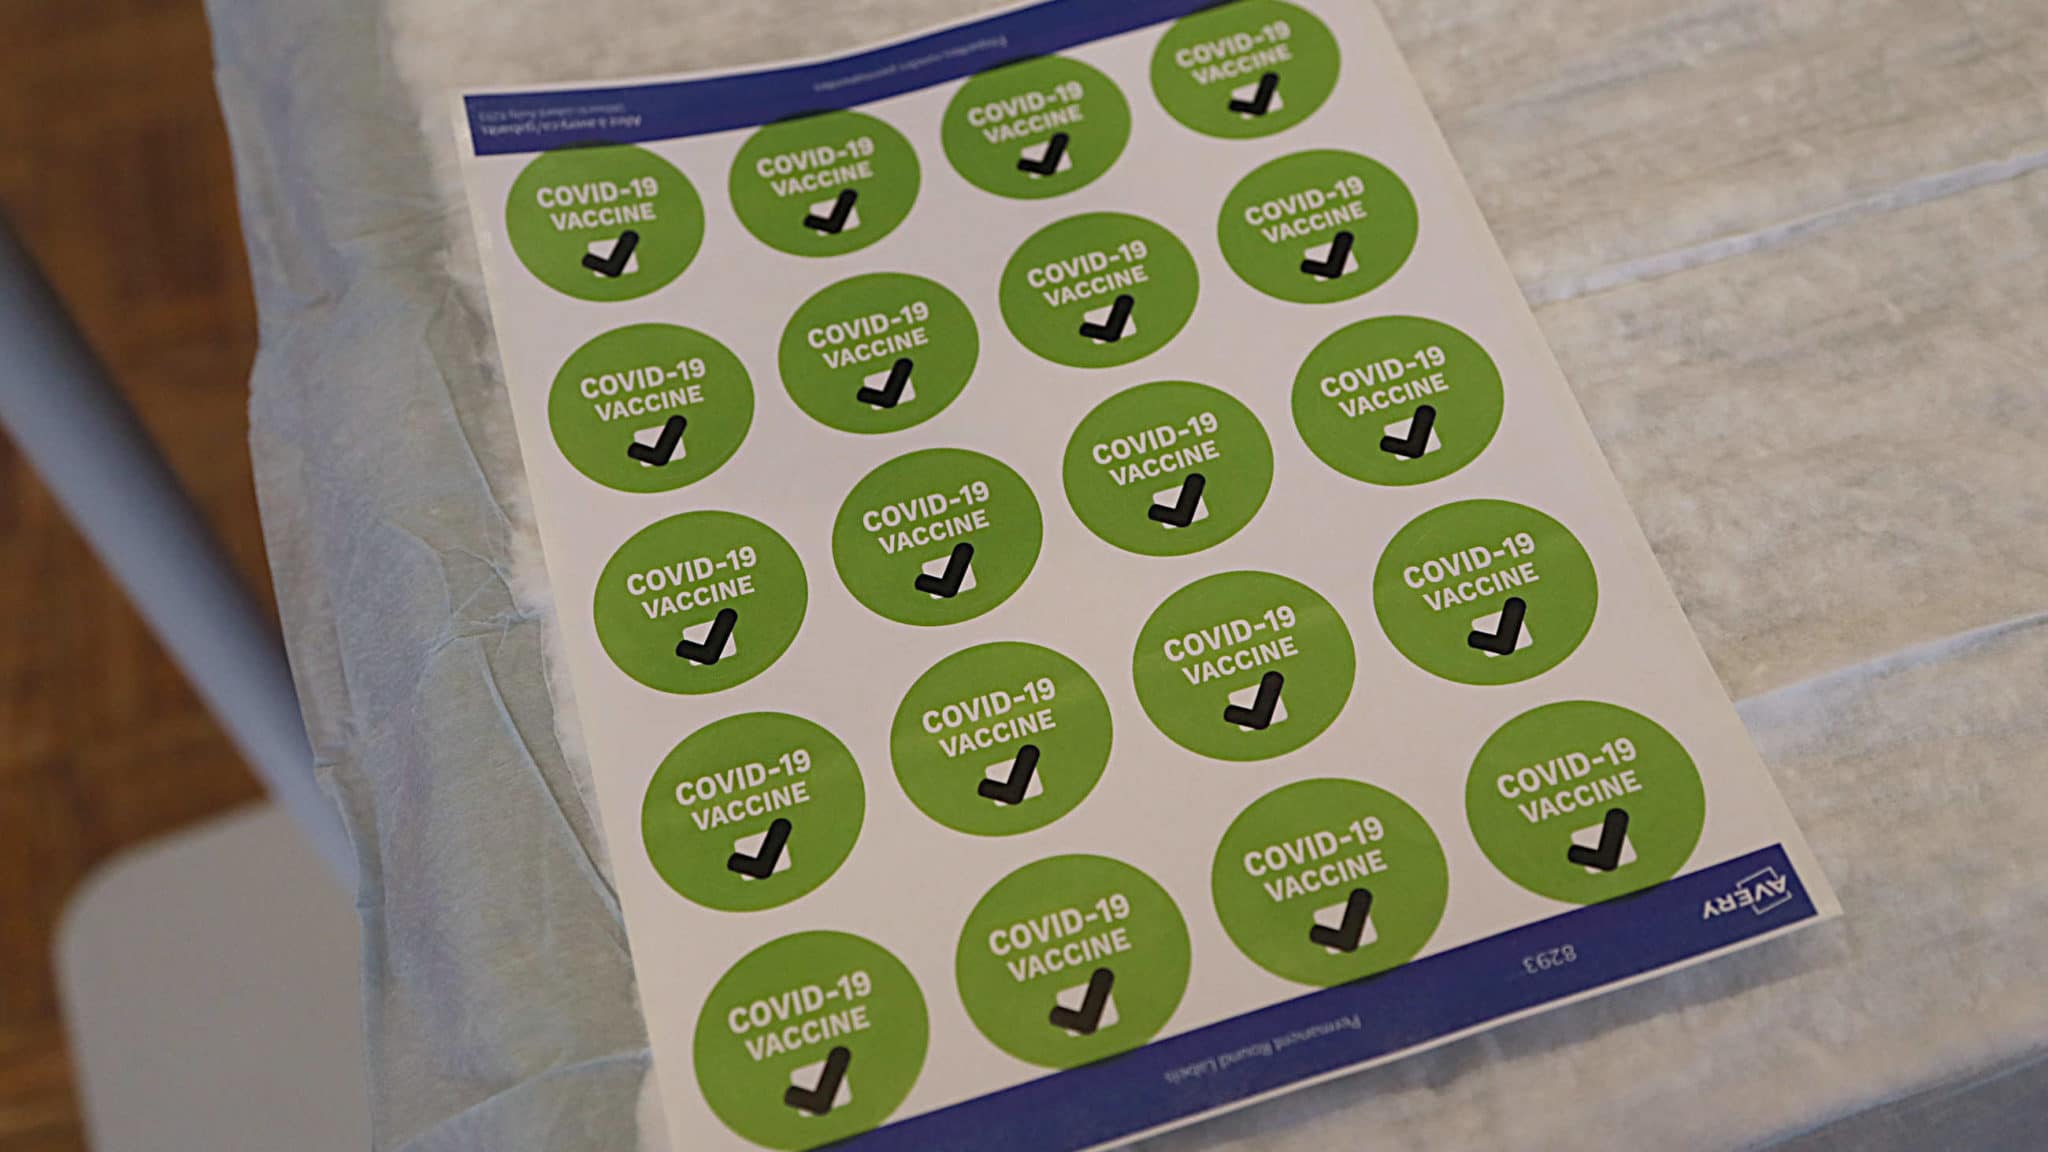 Stickers await those who get vaccinated for Covid-19 at Rhode Island Hospital in Providence, RI on Dec. 14, 2020.